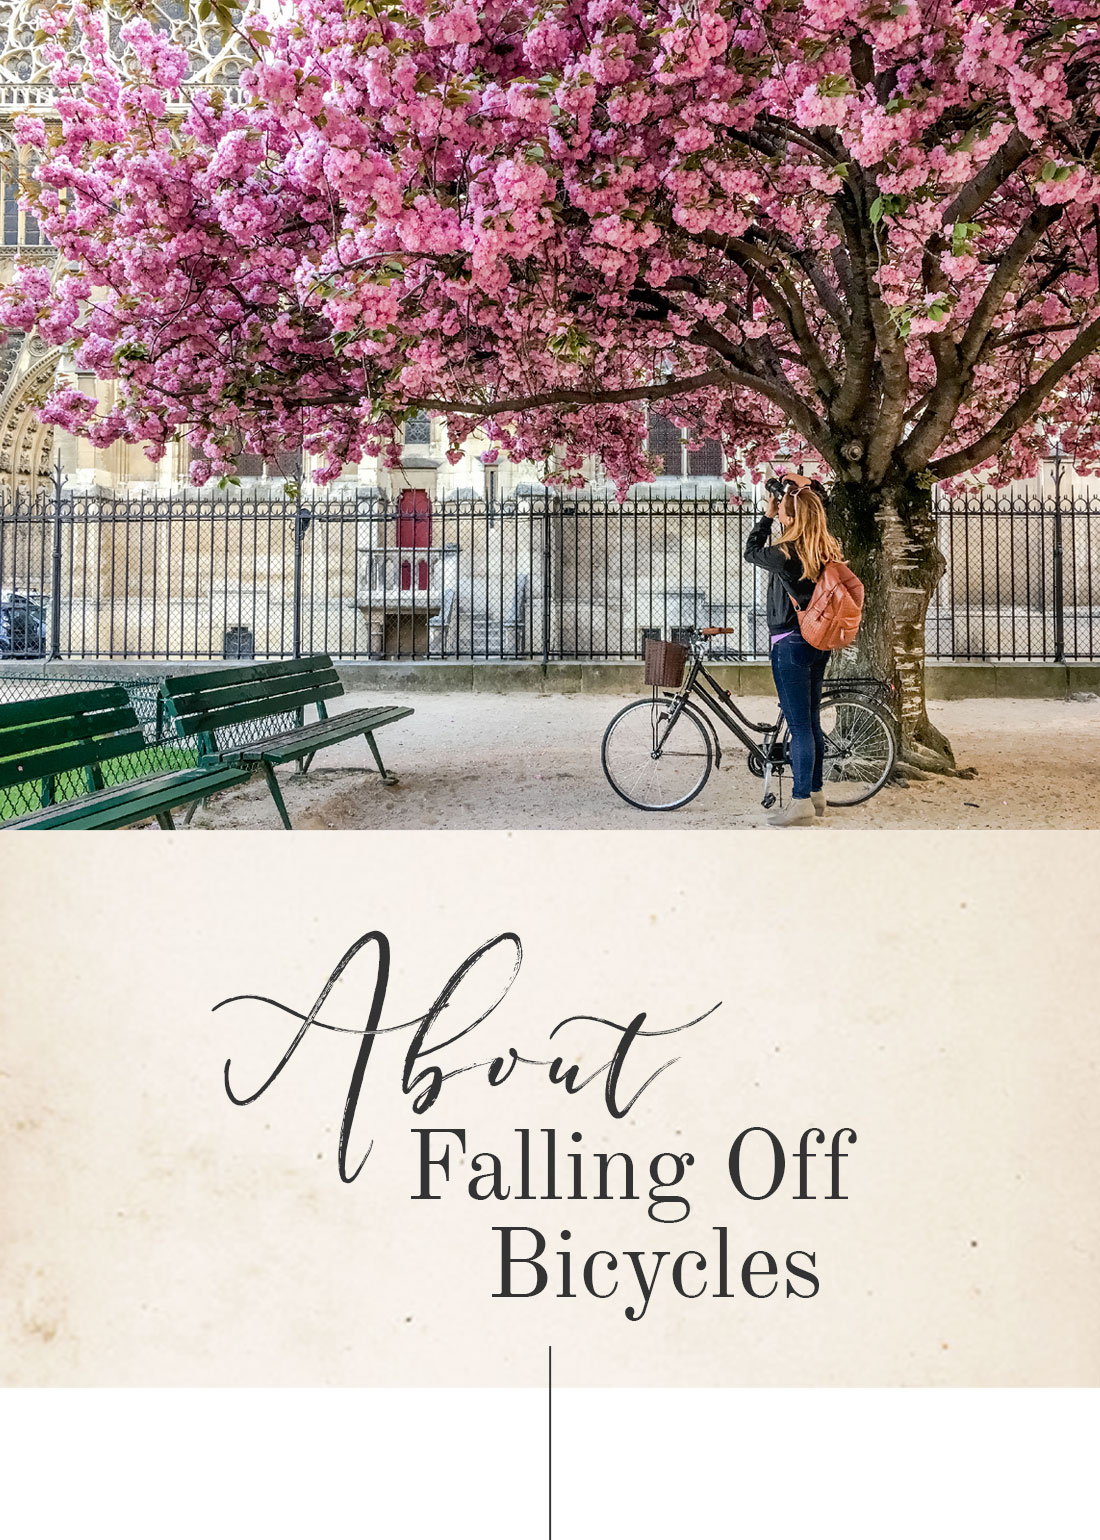 About Falling Off Bicycles